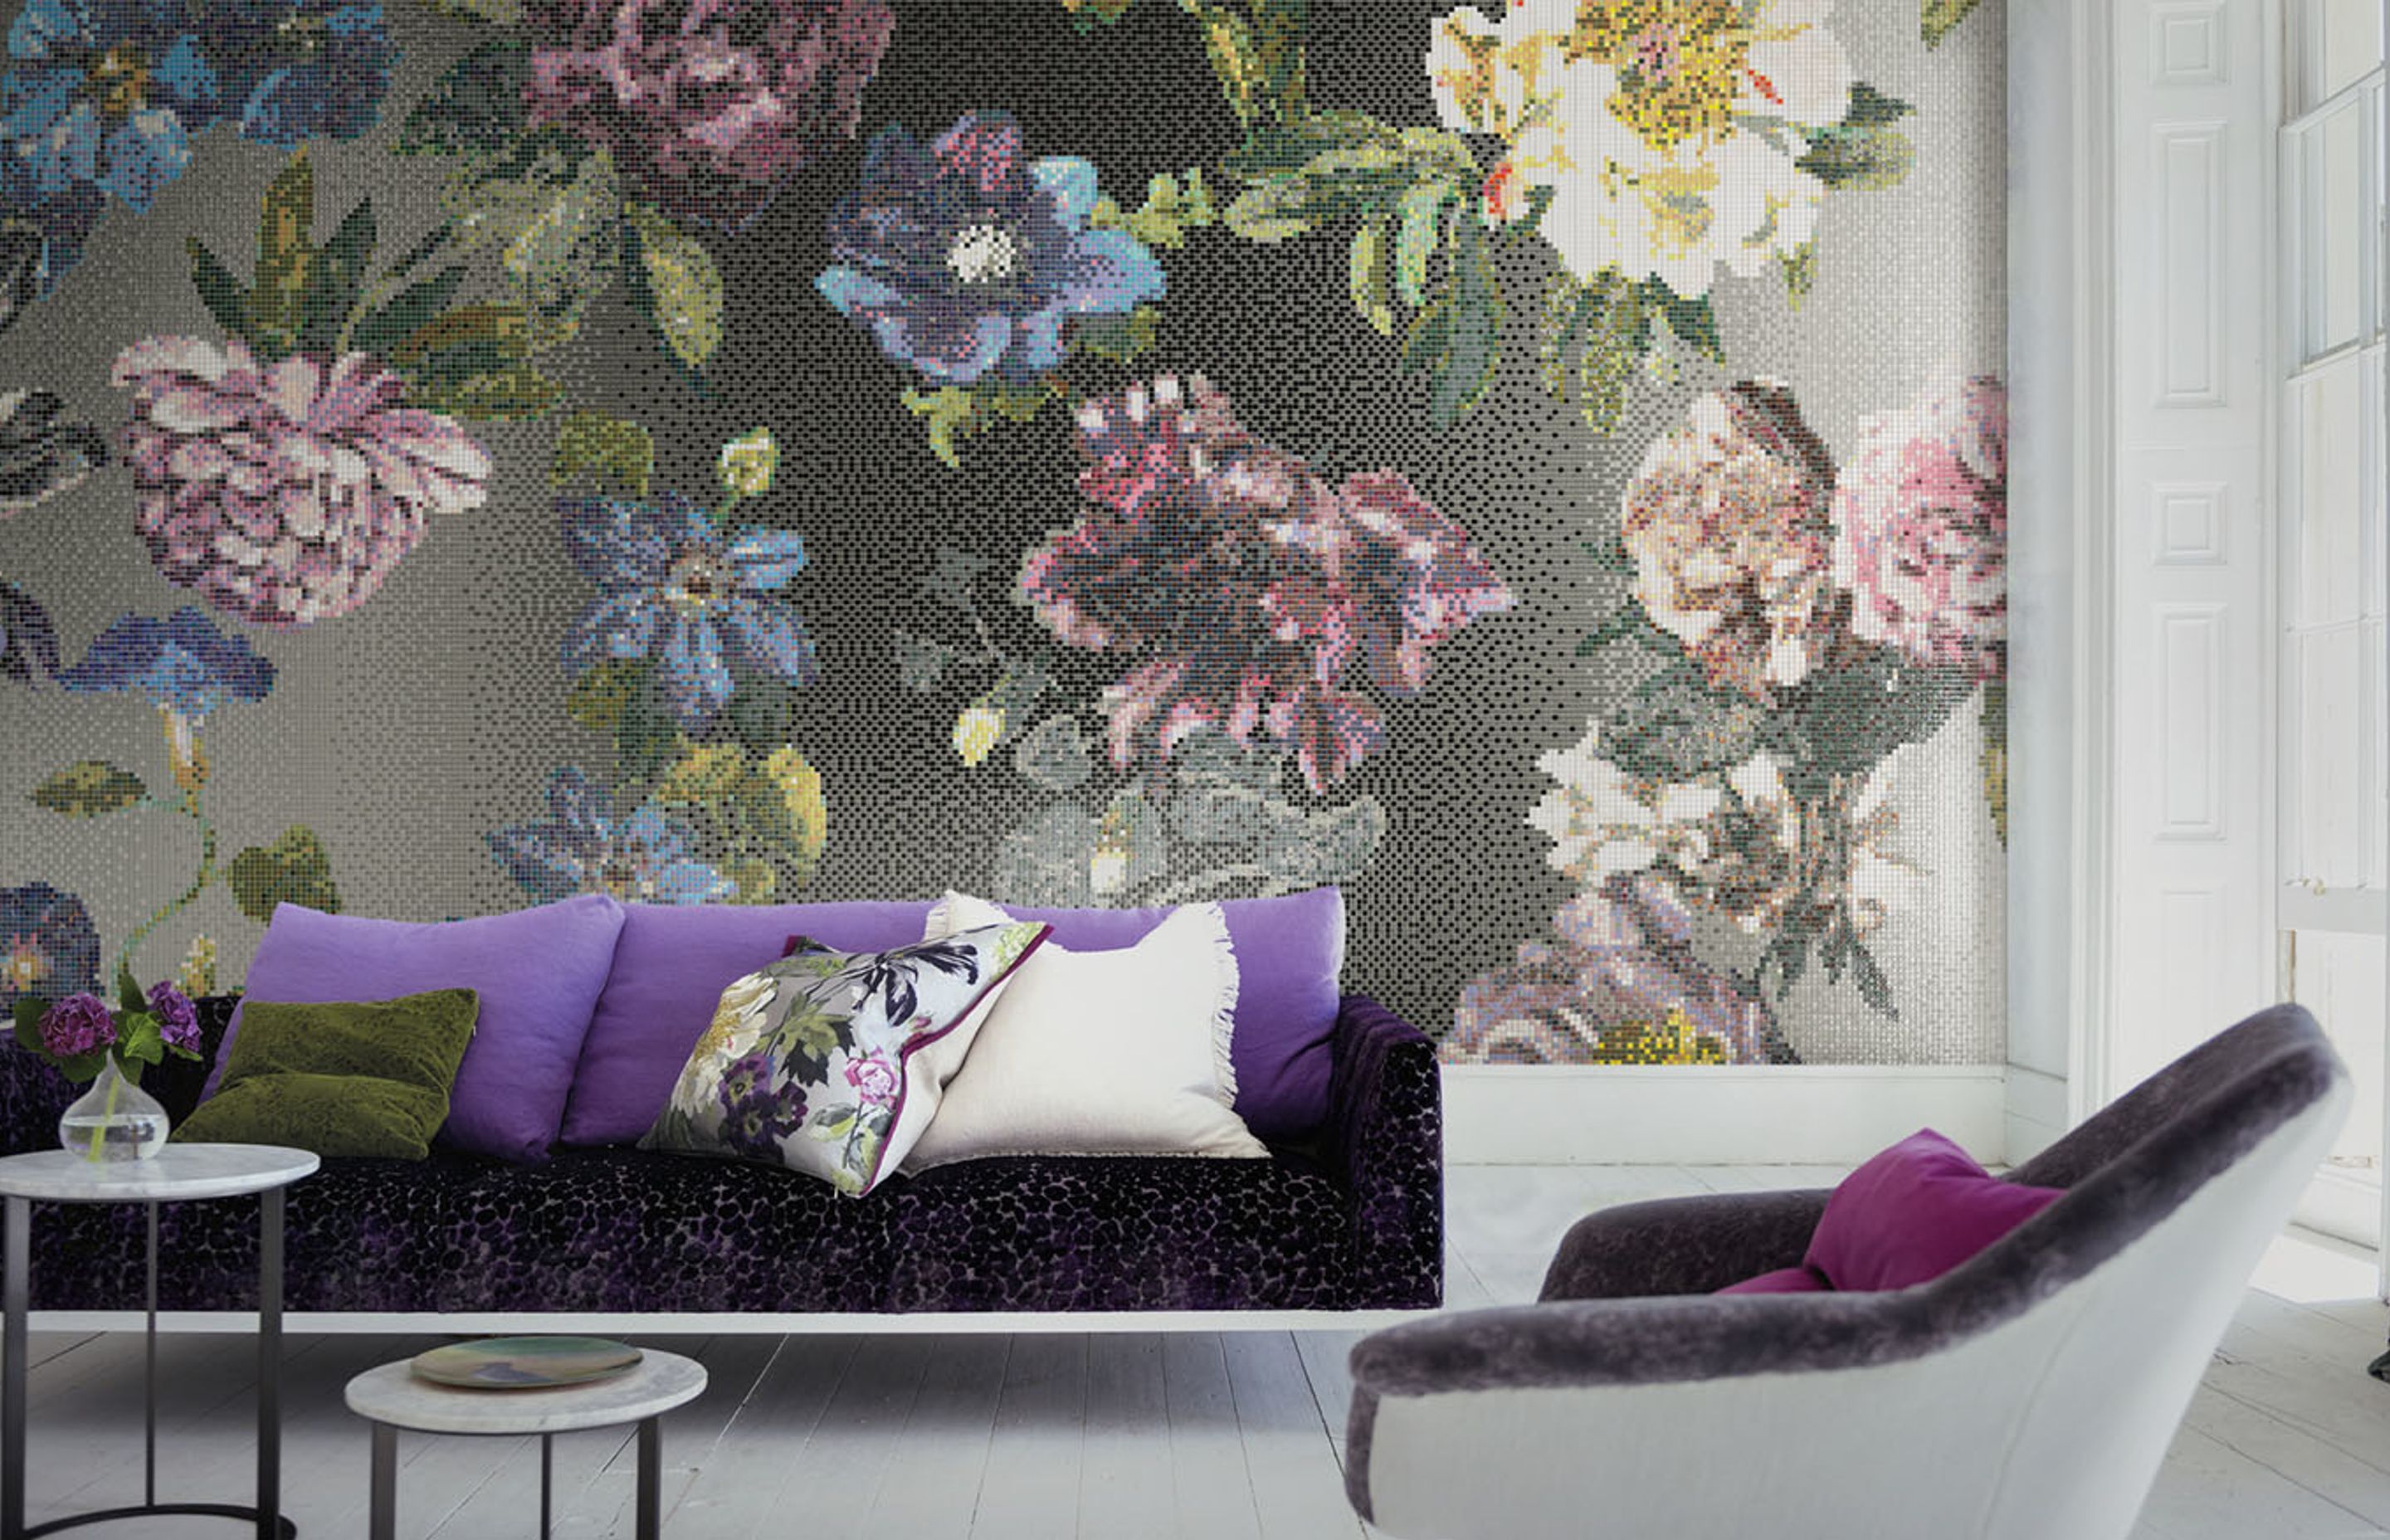 Even patterned interior walls can be created from Bisazza, like the Alexandria design